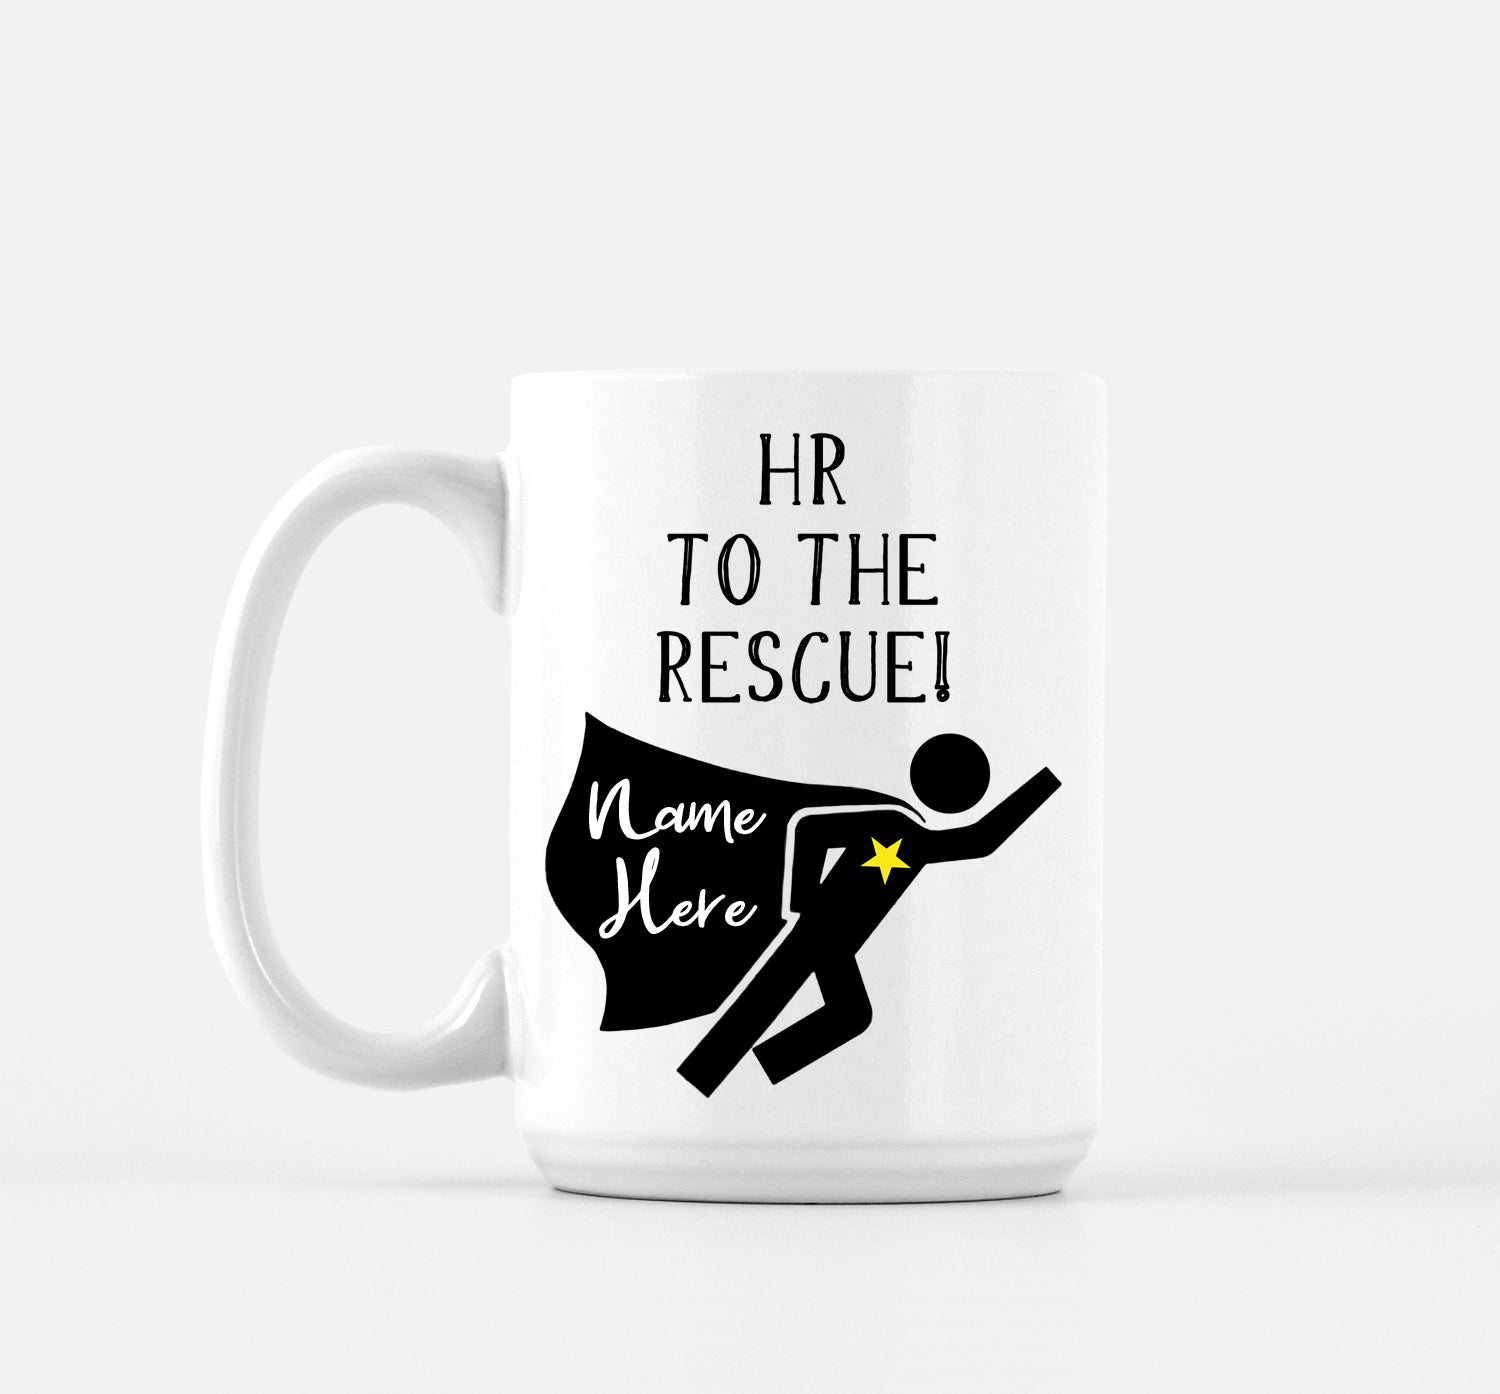 Human Resources Personalized Mug Gift Superhero by The Office Art Guy